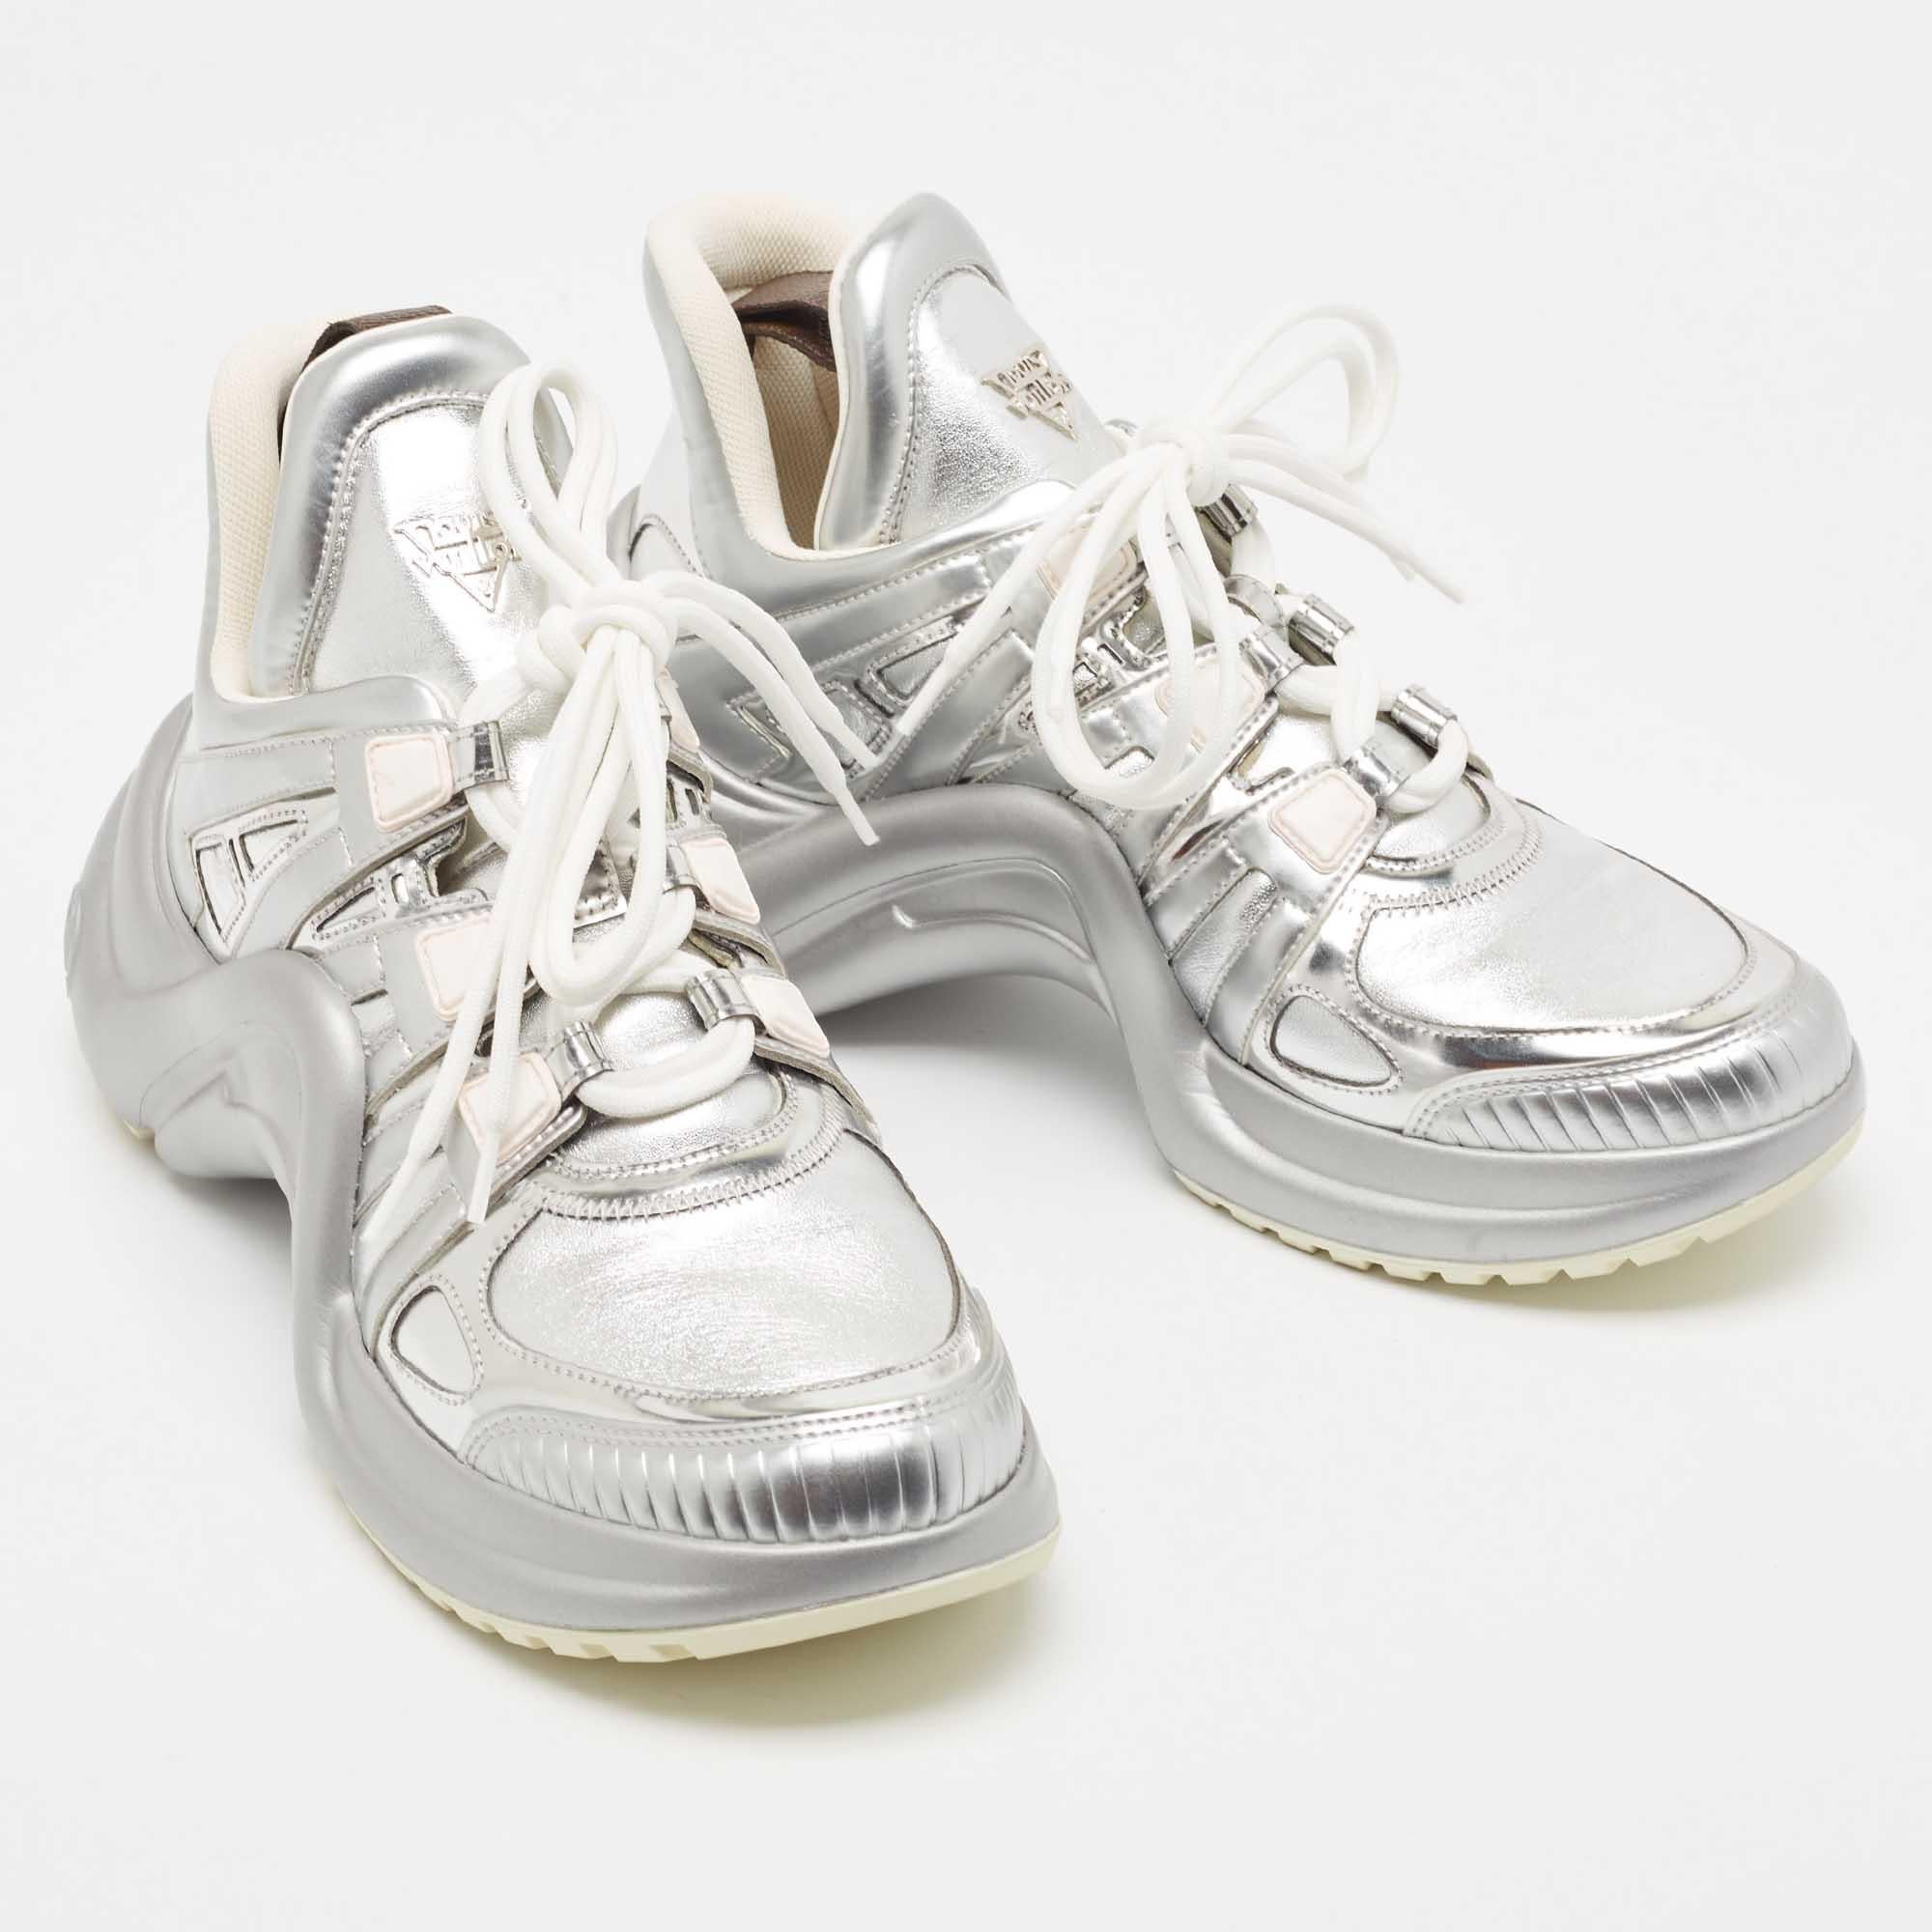 Louis Vuitton Silver Leather Archlight Sneakers Size 40 For Sale 3